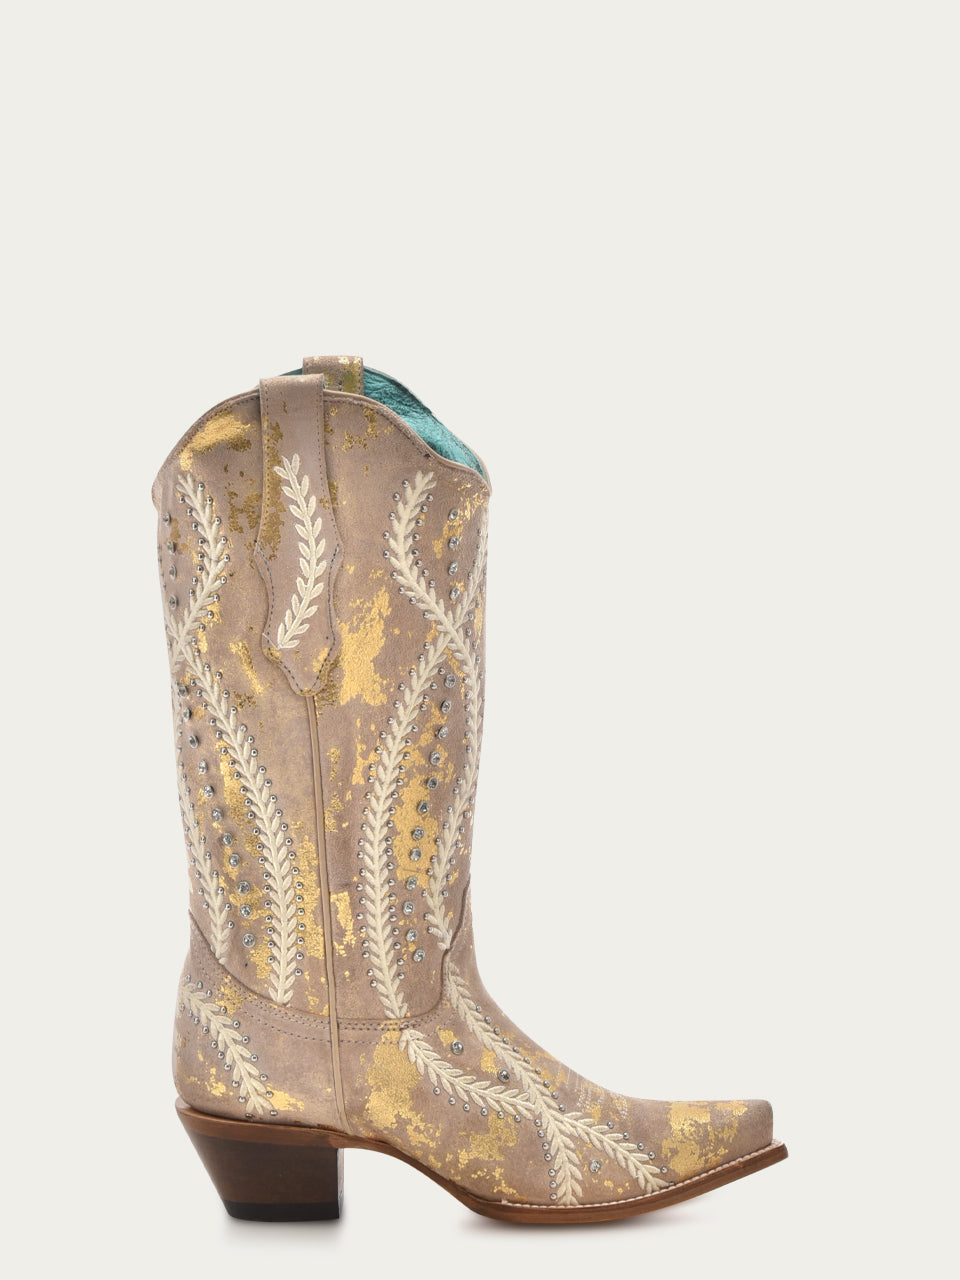 Z5246 - WOMEN'S WHITE EMBROIDERY WITH CRYSTALS AND STUDS TAN WITH GOLD TOUCHES SNIP TOE COWBOY BOOT